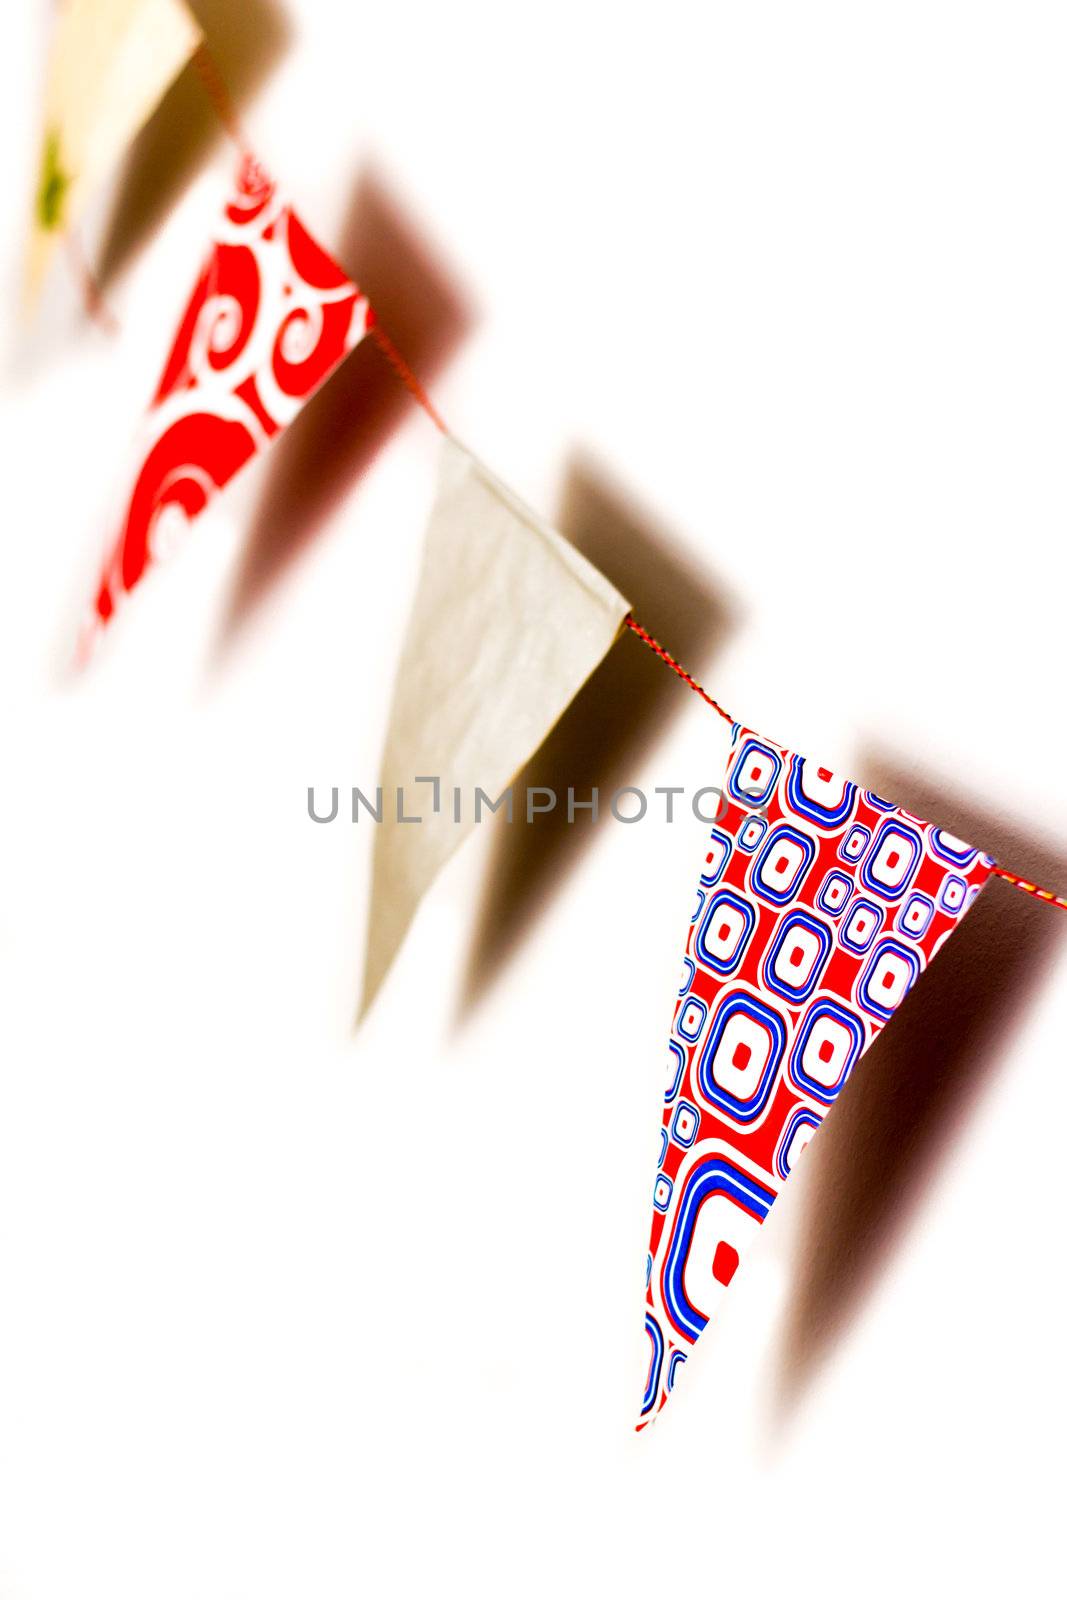 Detail of pattern triangles in a bunting flags with shadows on white background